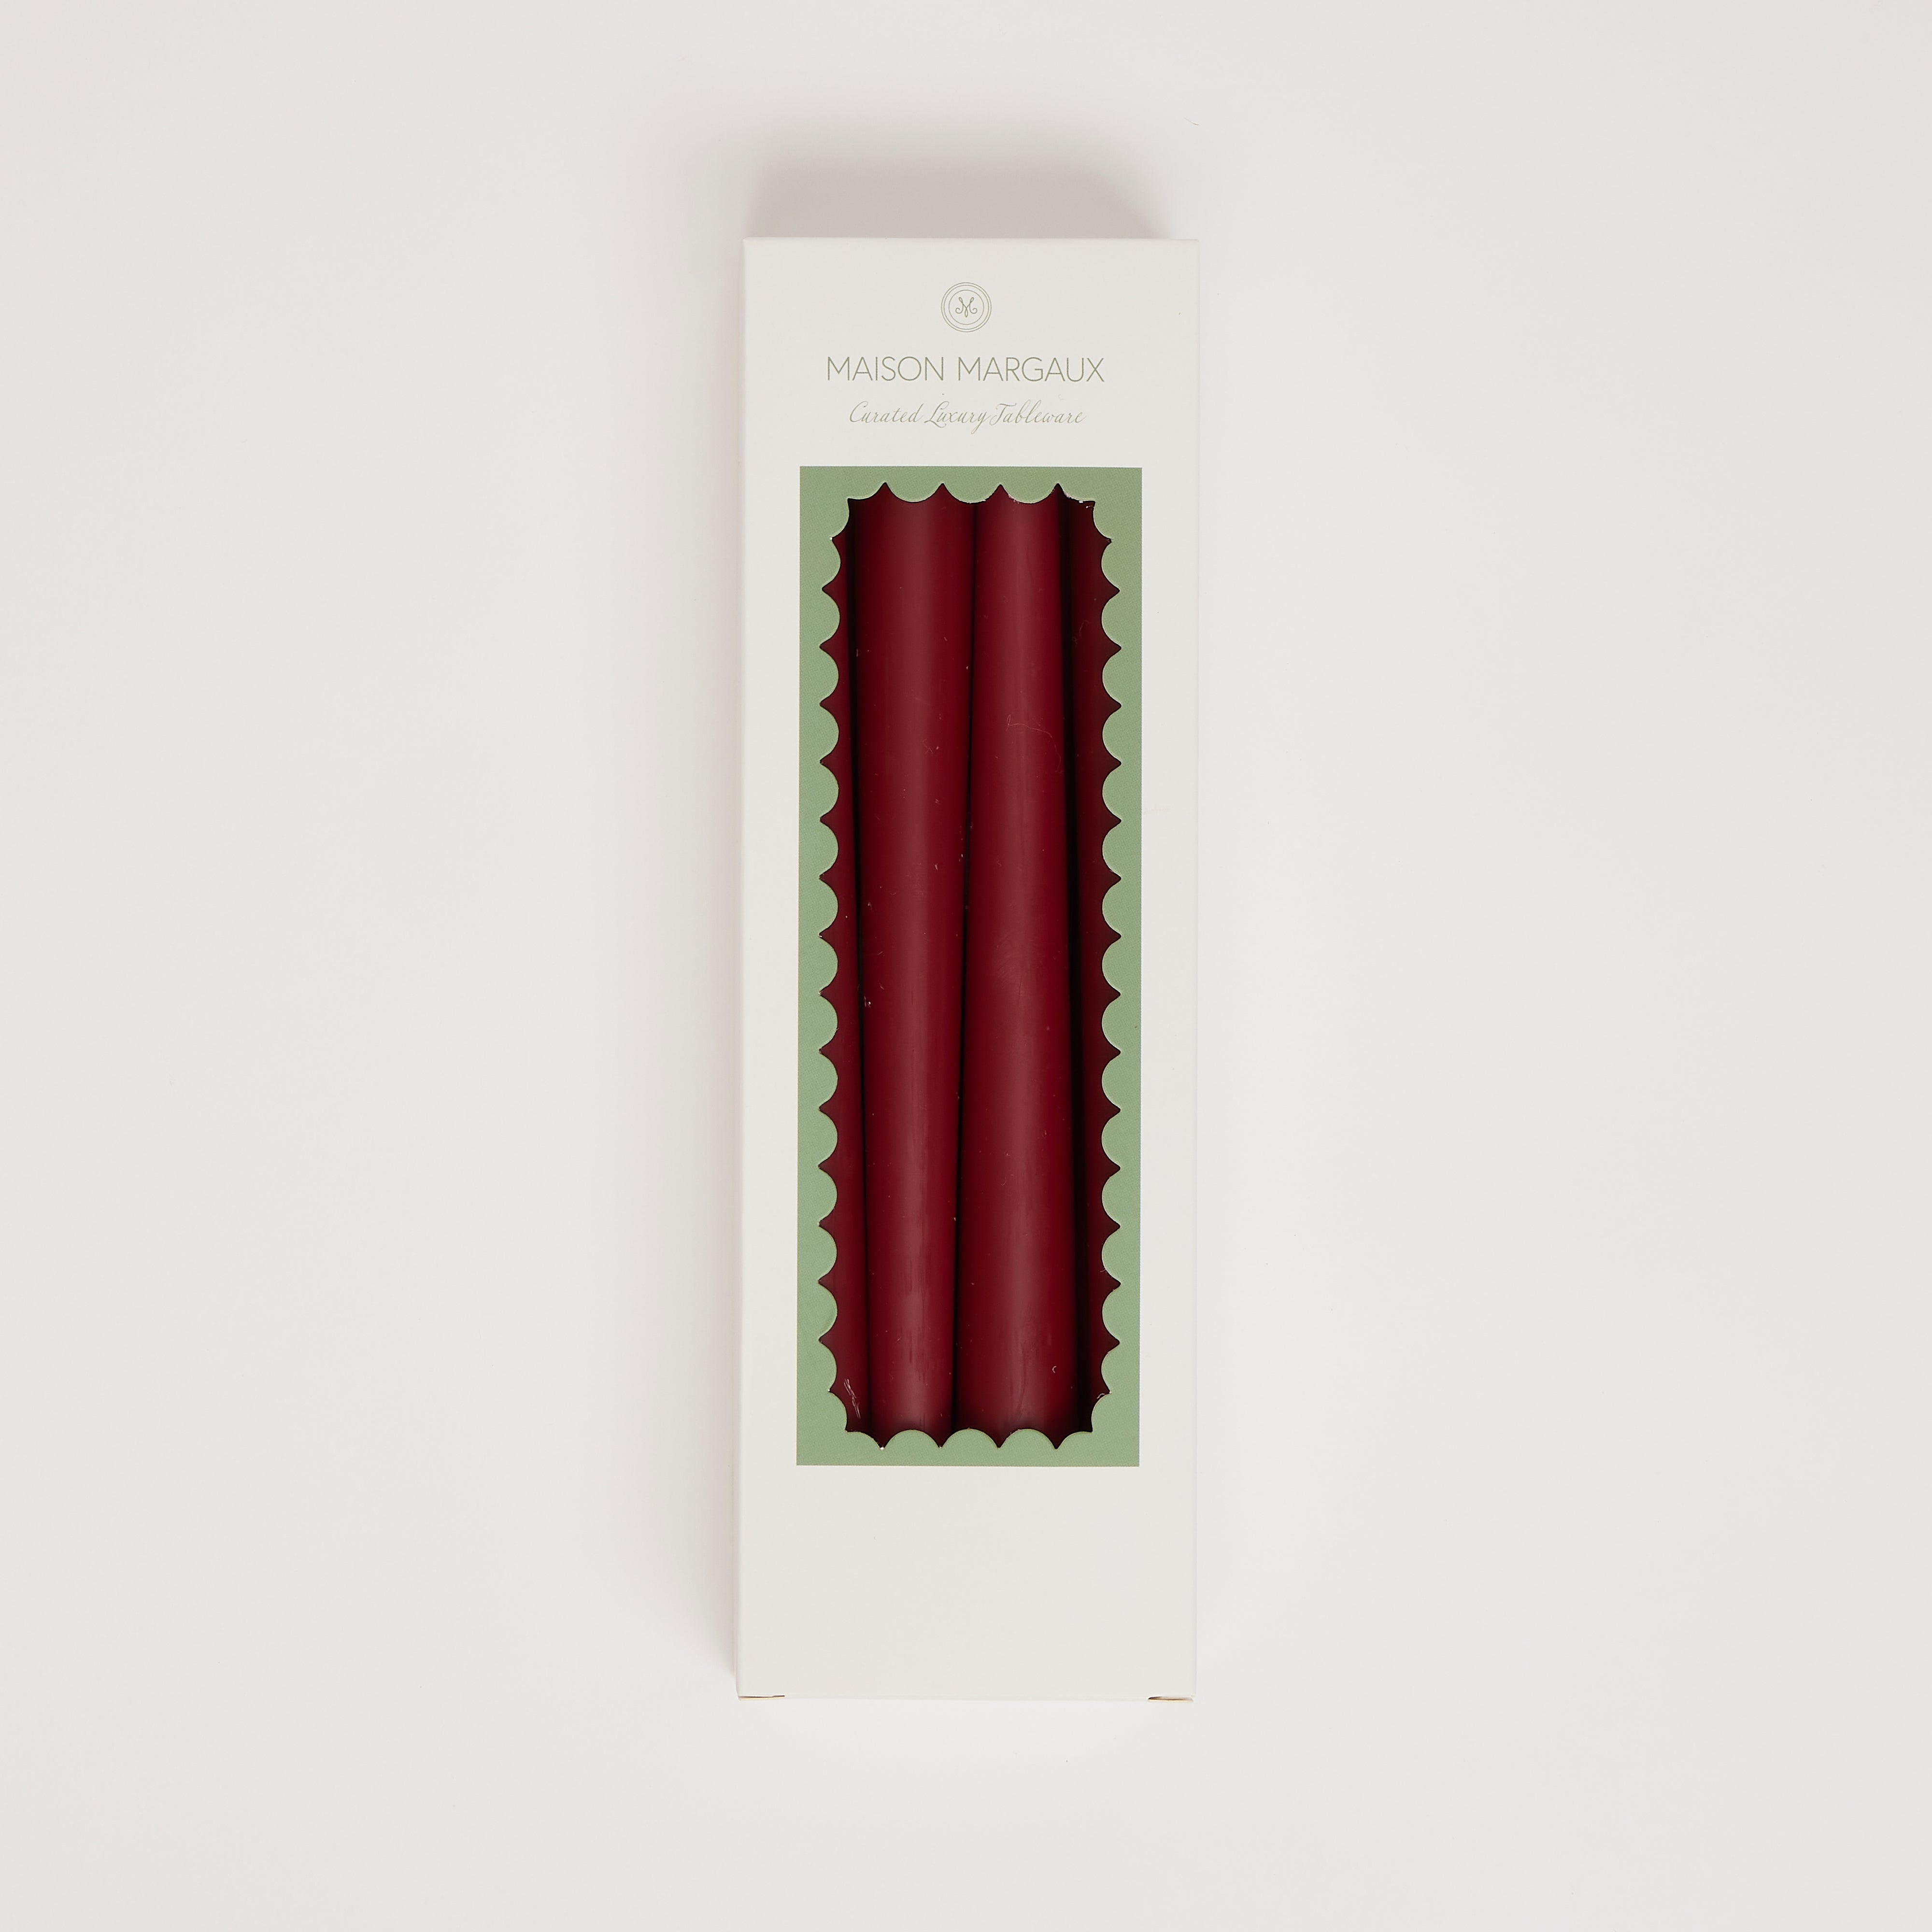 Burgundy Red Tapered Candles (set of 8)